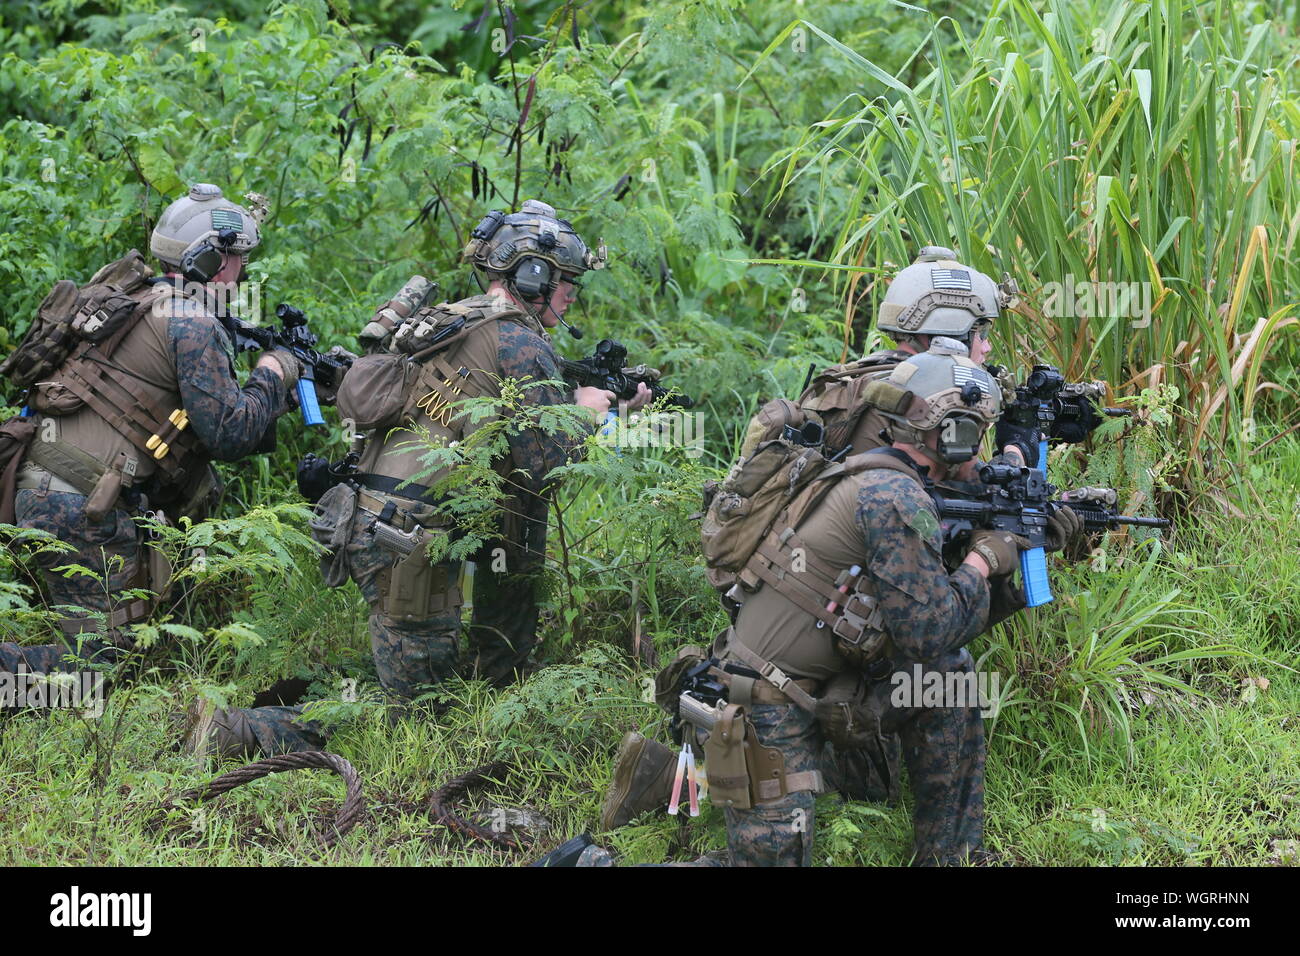 U.S. Marines with 3rd Reconnaissance Battalion, 3rd Marine Division, secure the beach for follow on forces from Special Operations Command Australia and U.S. Air Force 36th Civil Engineer Squadron Explosive Ordnance Disposal, during a training evolution as part of exercise HYDRACRAB in Santa Rita, Guam, Aug. 26, 2019. HYDRACRAB is a multilateral exercise conducted by U.S. Marines and Sailors with military service members from Australia, Canada, and New Zealand. The purpose of this exercise is to prepare the participating Explosive Ordnance Disposal forces to operate as an integrated, capable, Stock Photo